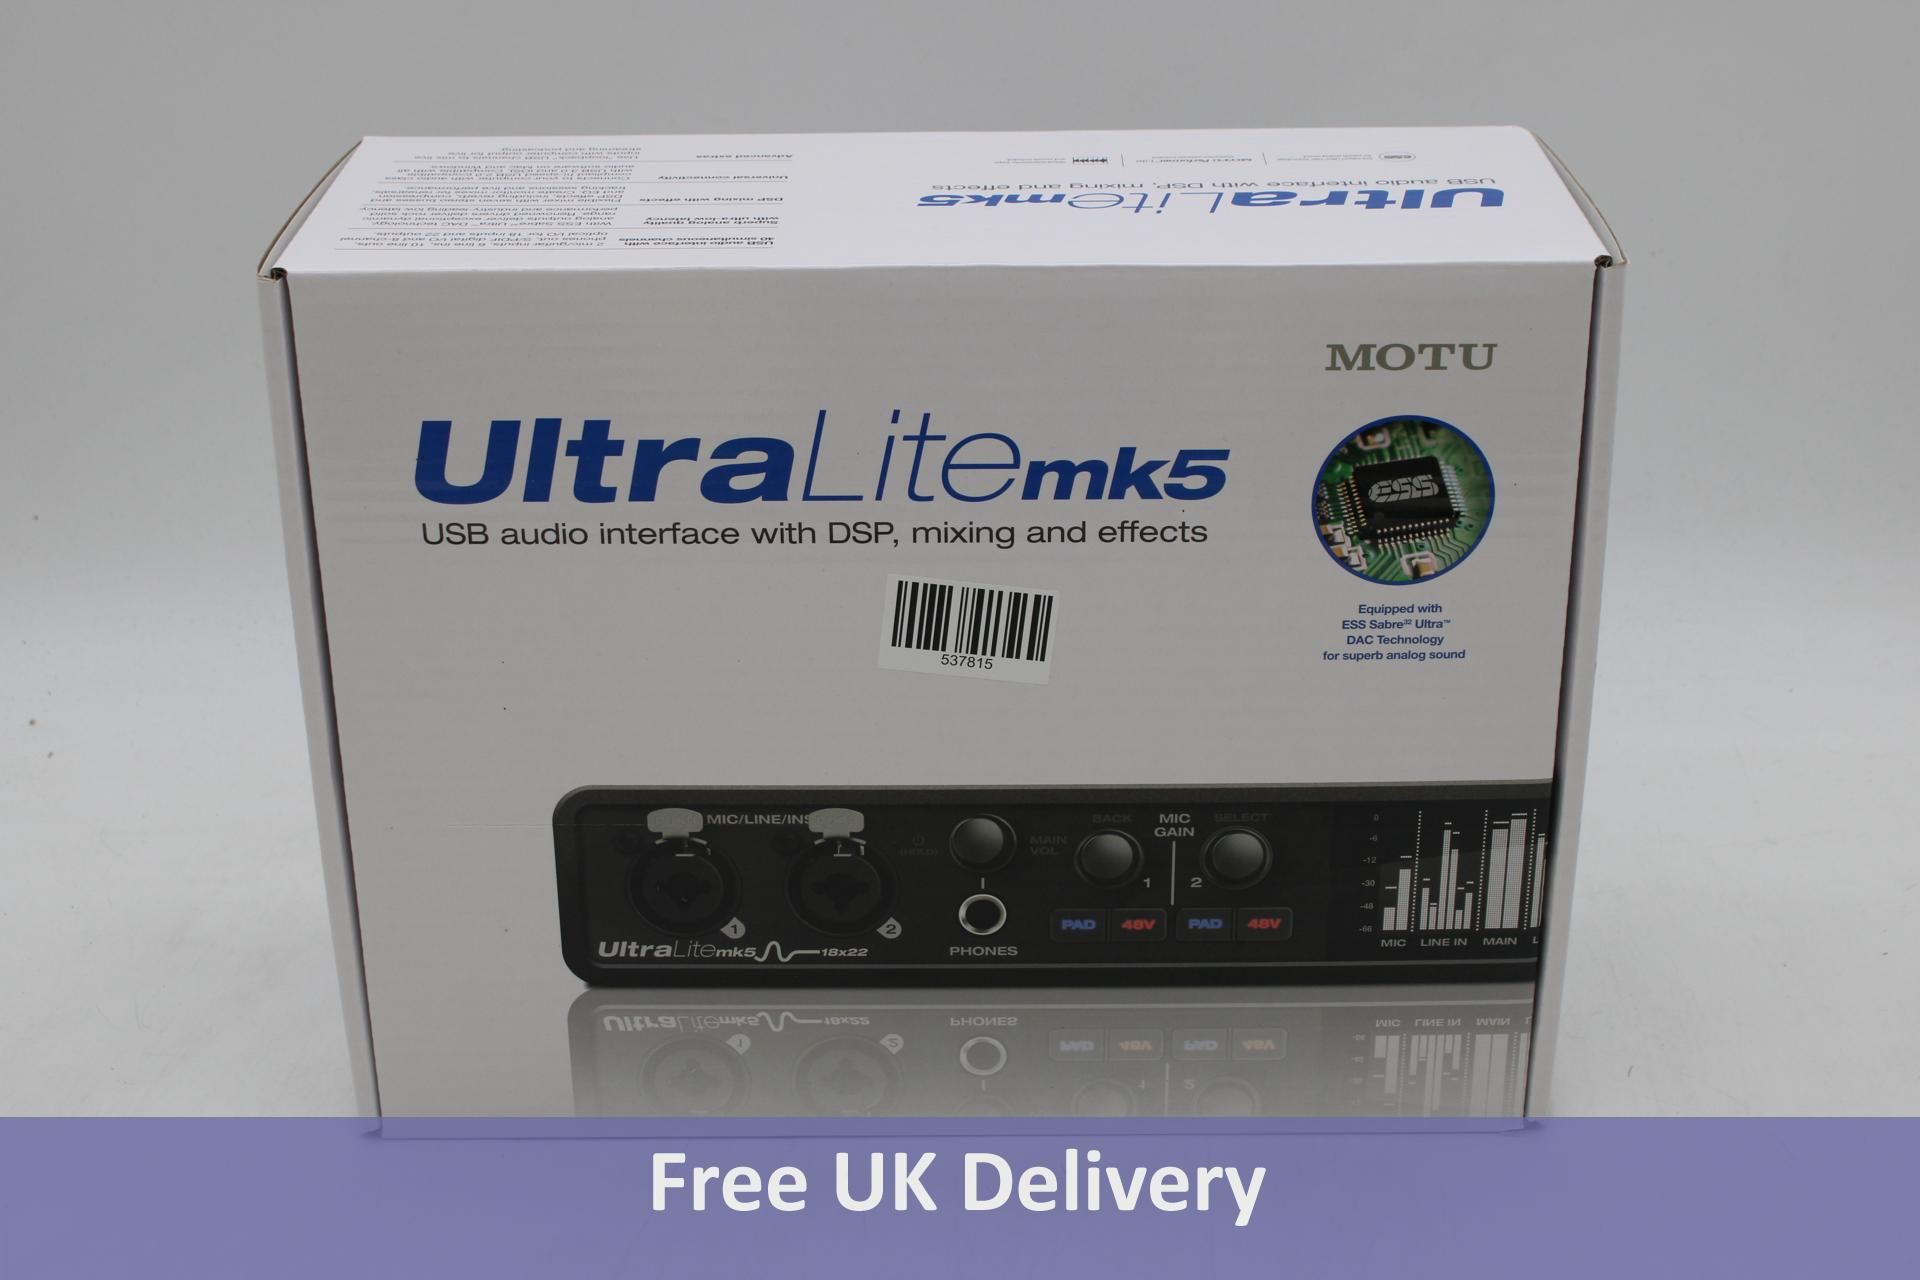 Motu Ultra Lite MK5 USB Audio Interface with DSP, Mixing & Effects